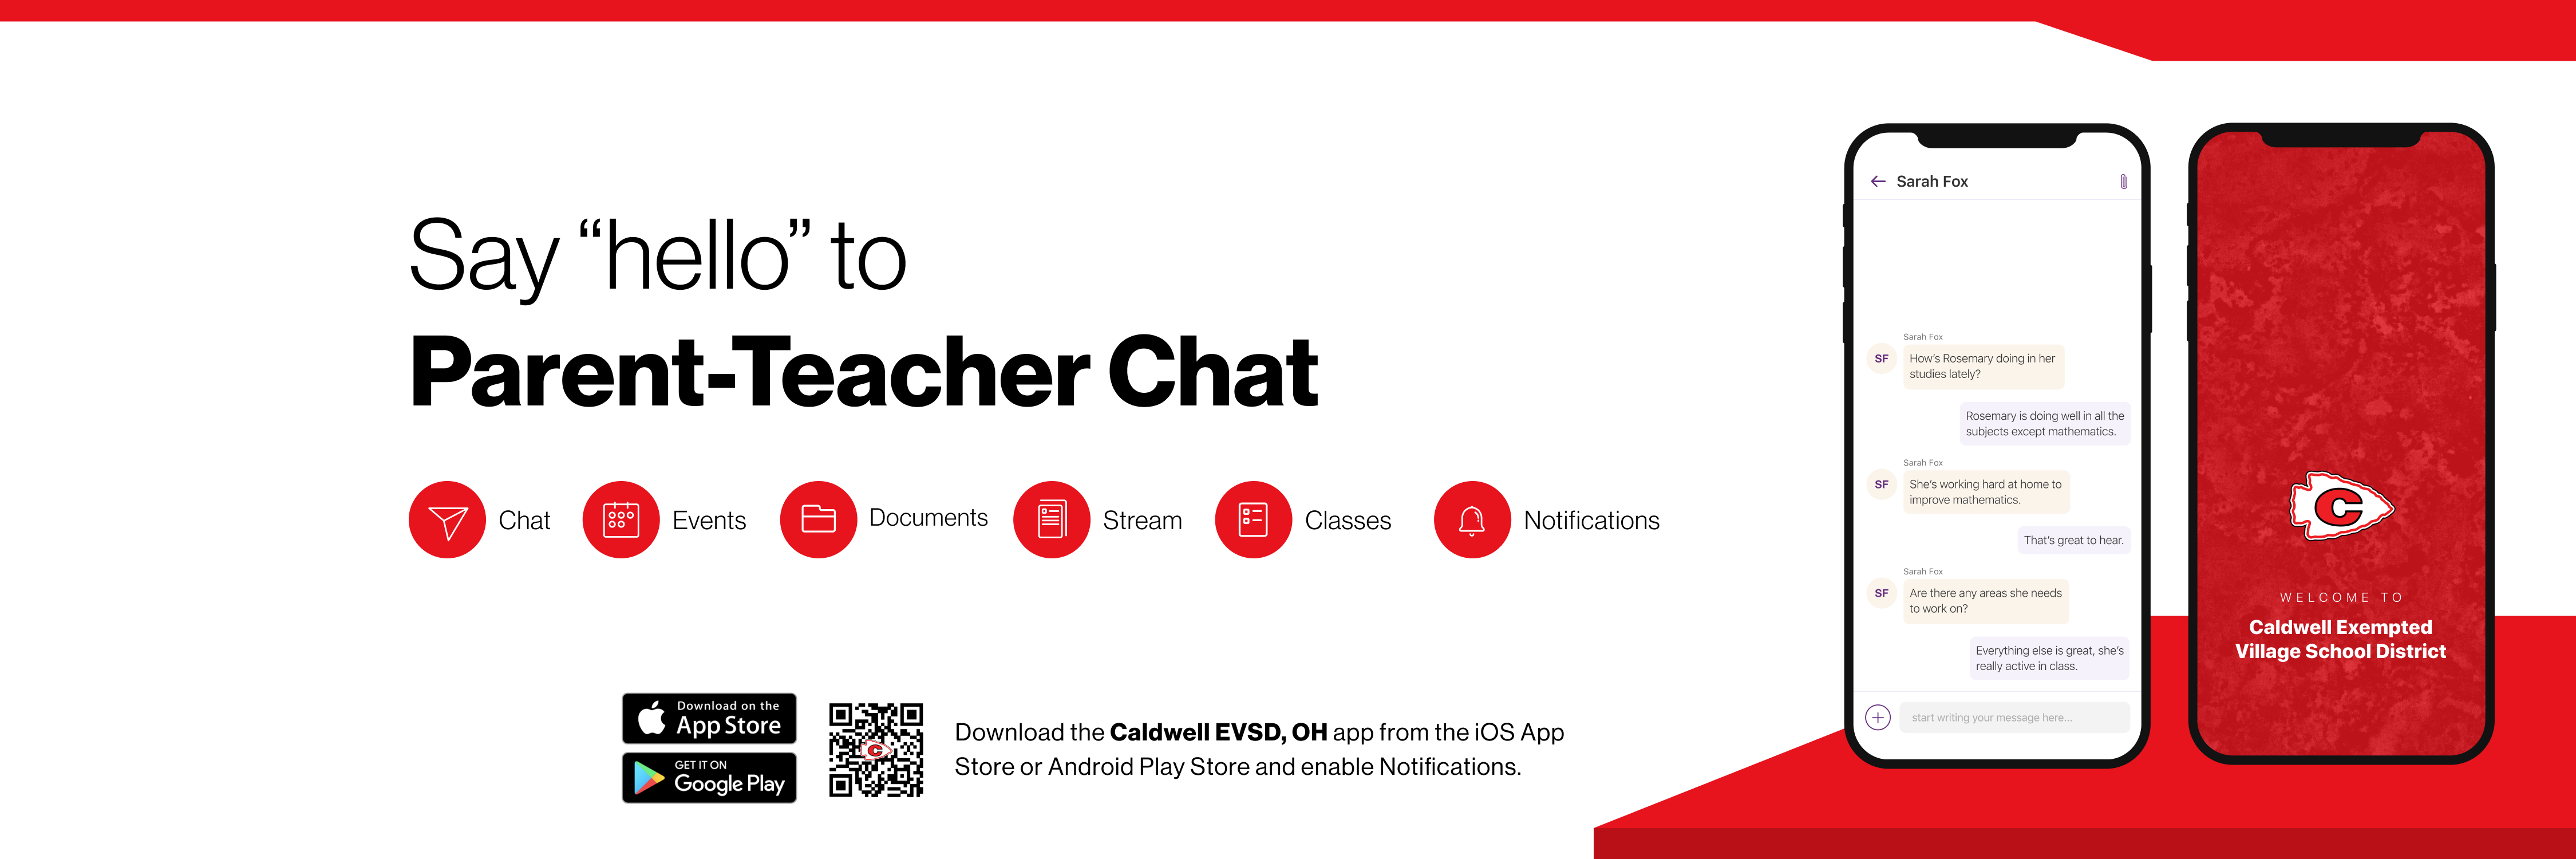 Say hello to Parent-Teacher chat in the new Rooms app. Download the Caldwell Exempted Village School District app in the Google Play or Apple App store.